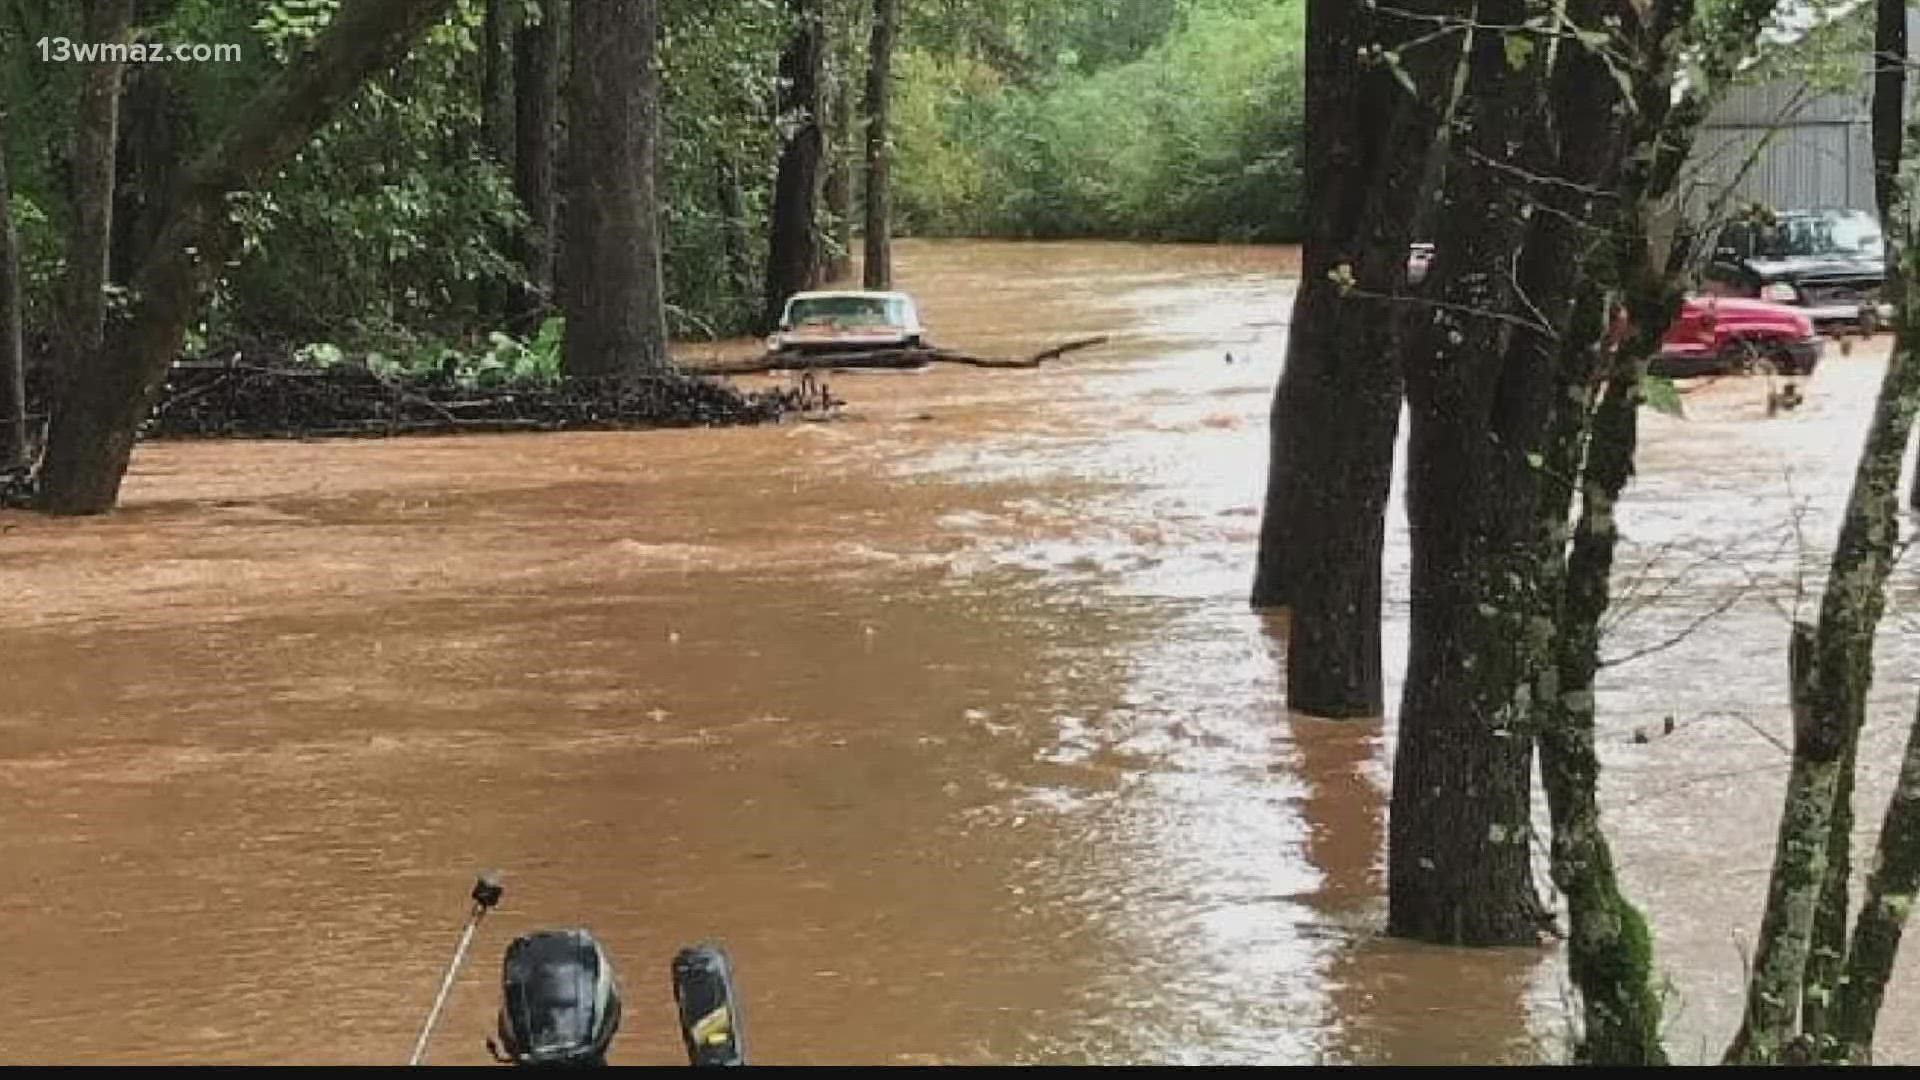 As flash floods ripped across some parts of Central Georgia Thursday, Jones County deputies and a neighbor teamed up to save two people.